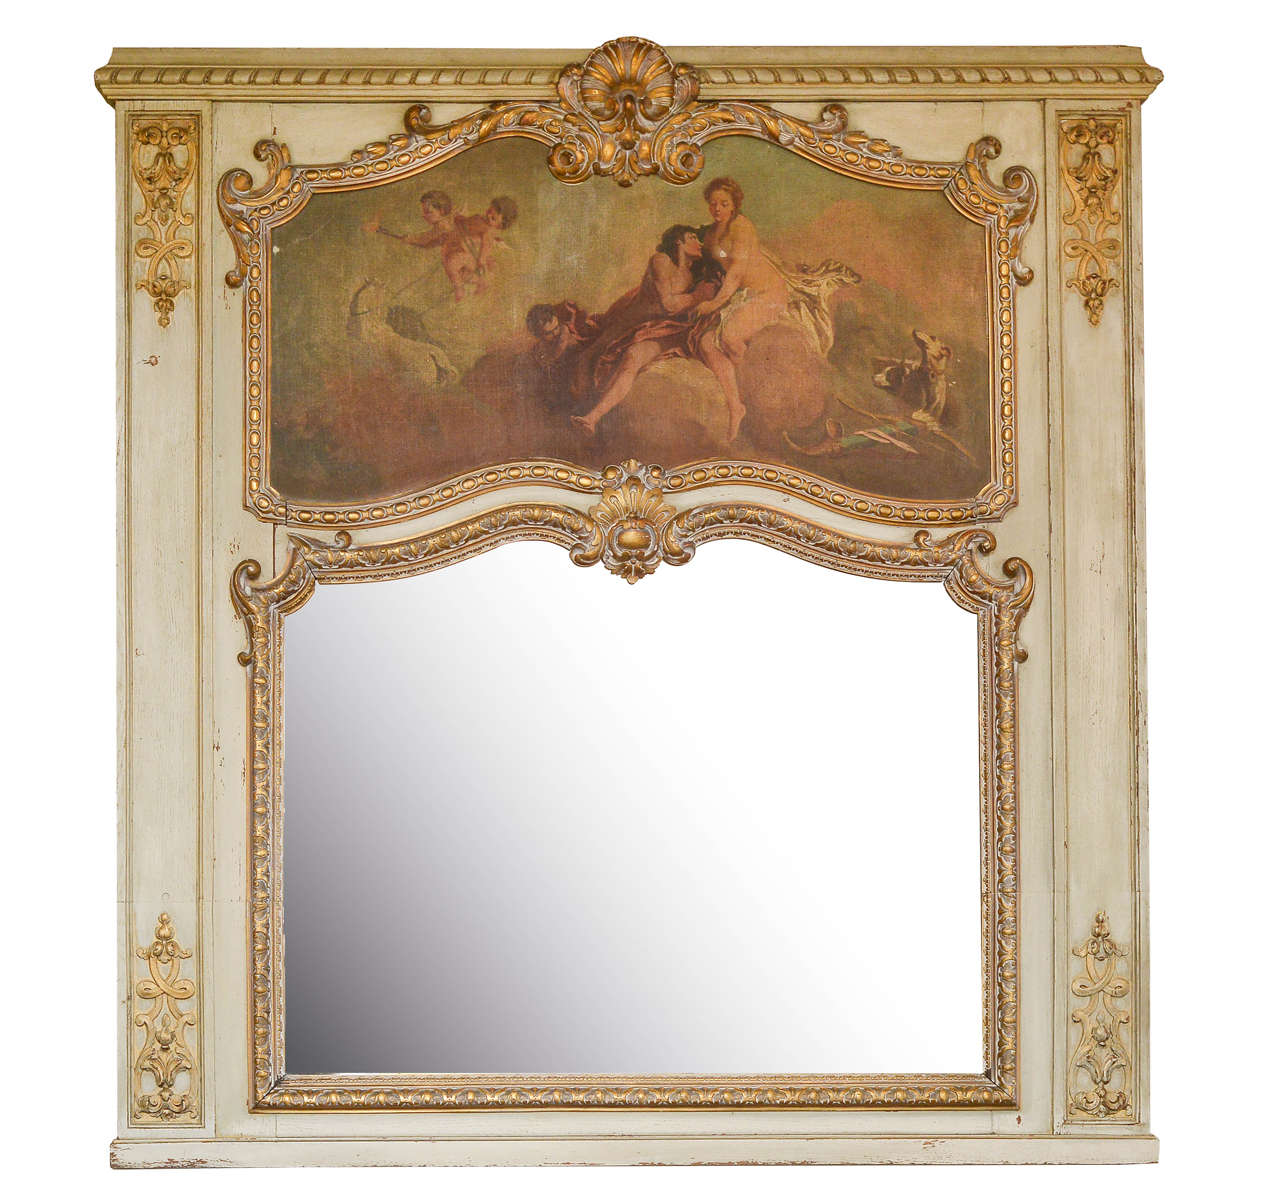 French Louis XVI style painted and gilt trumeau with allegorical scene, oil on canvas, Circa 1840.